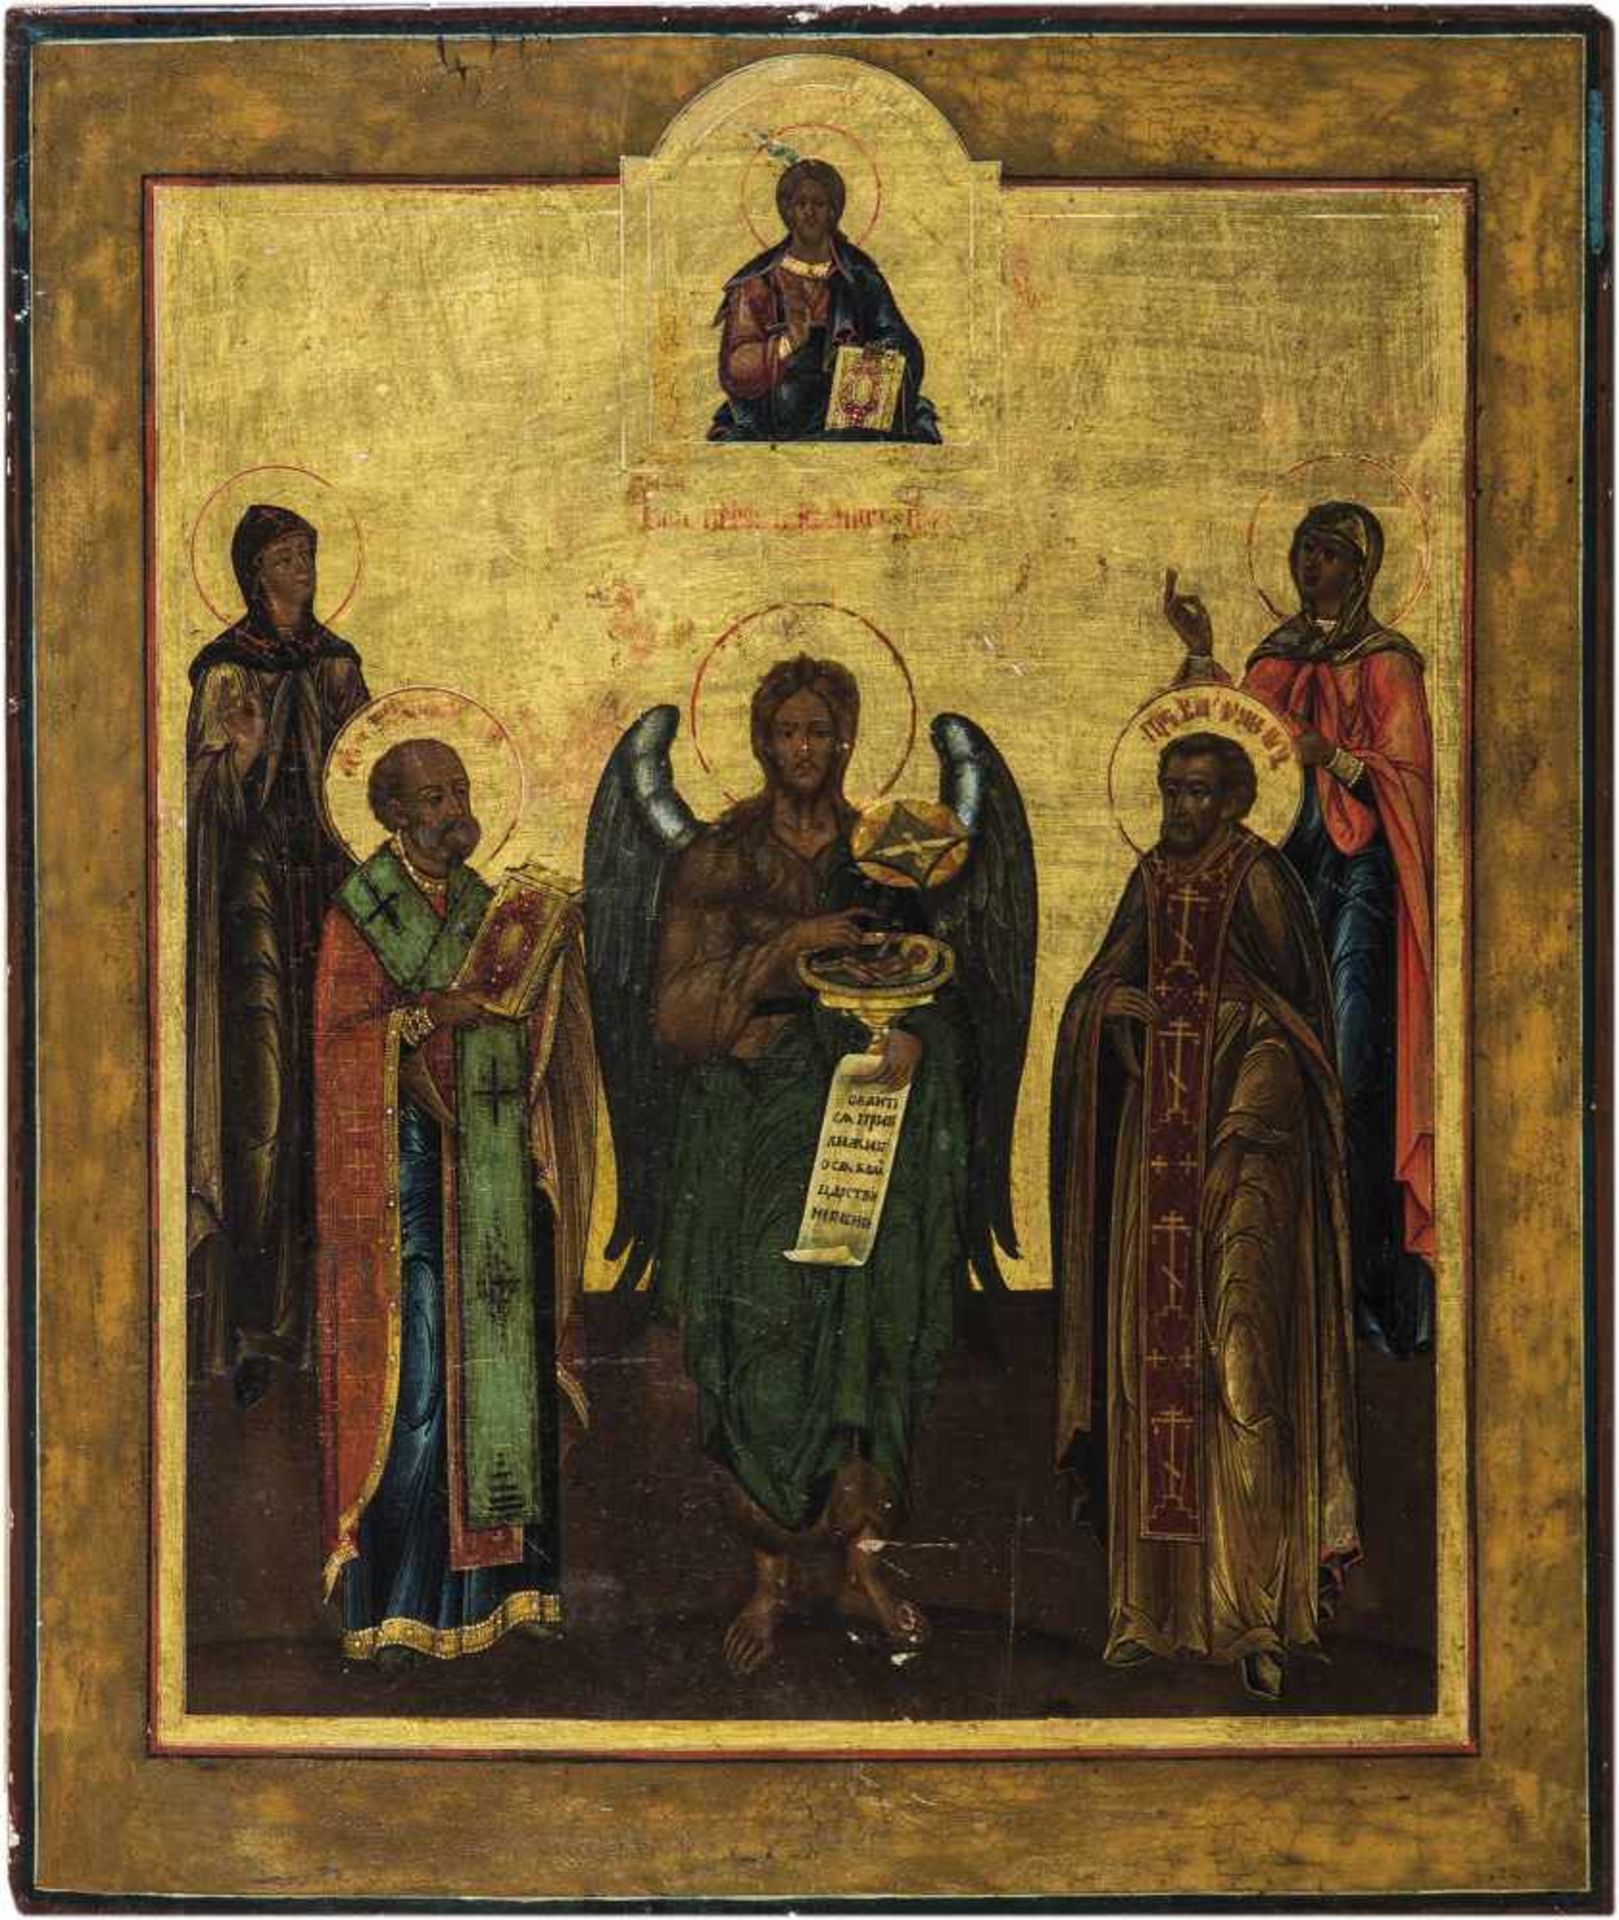 St. John the forerunner with selected Saints. Russia, 19th century. Tempera on gesso onwood panel